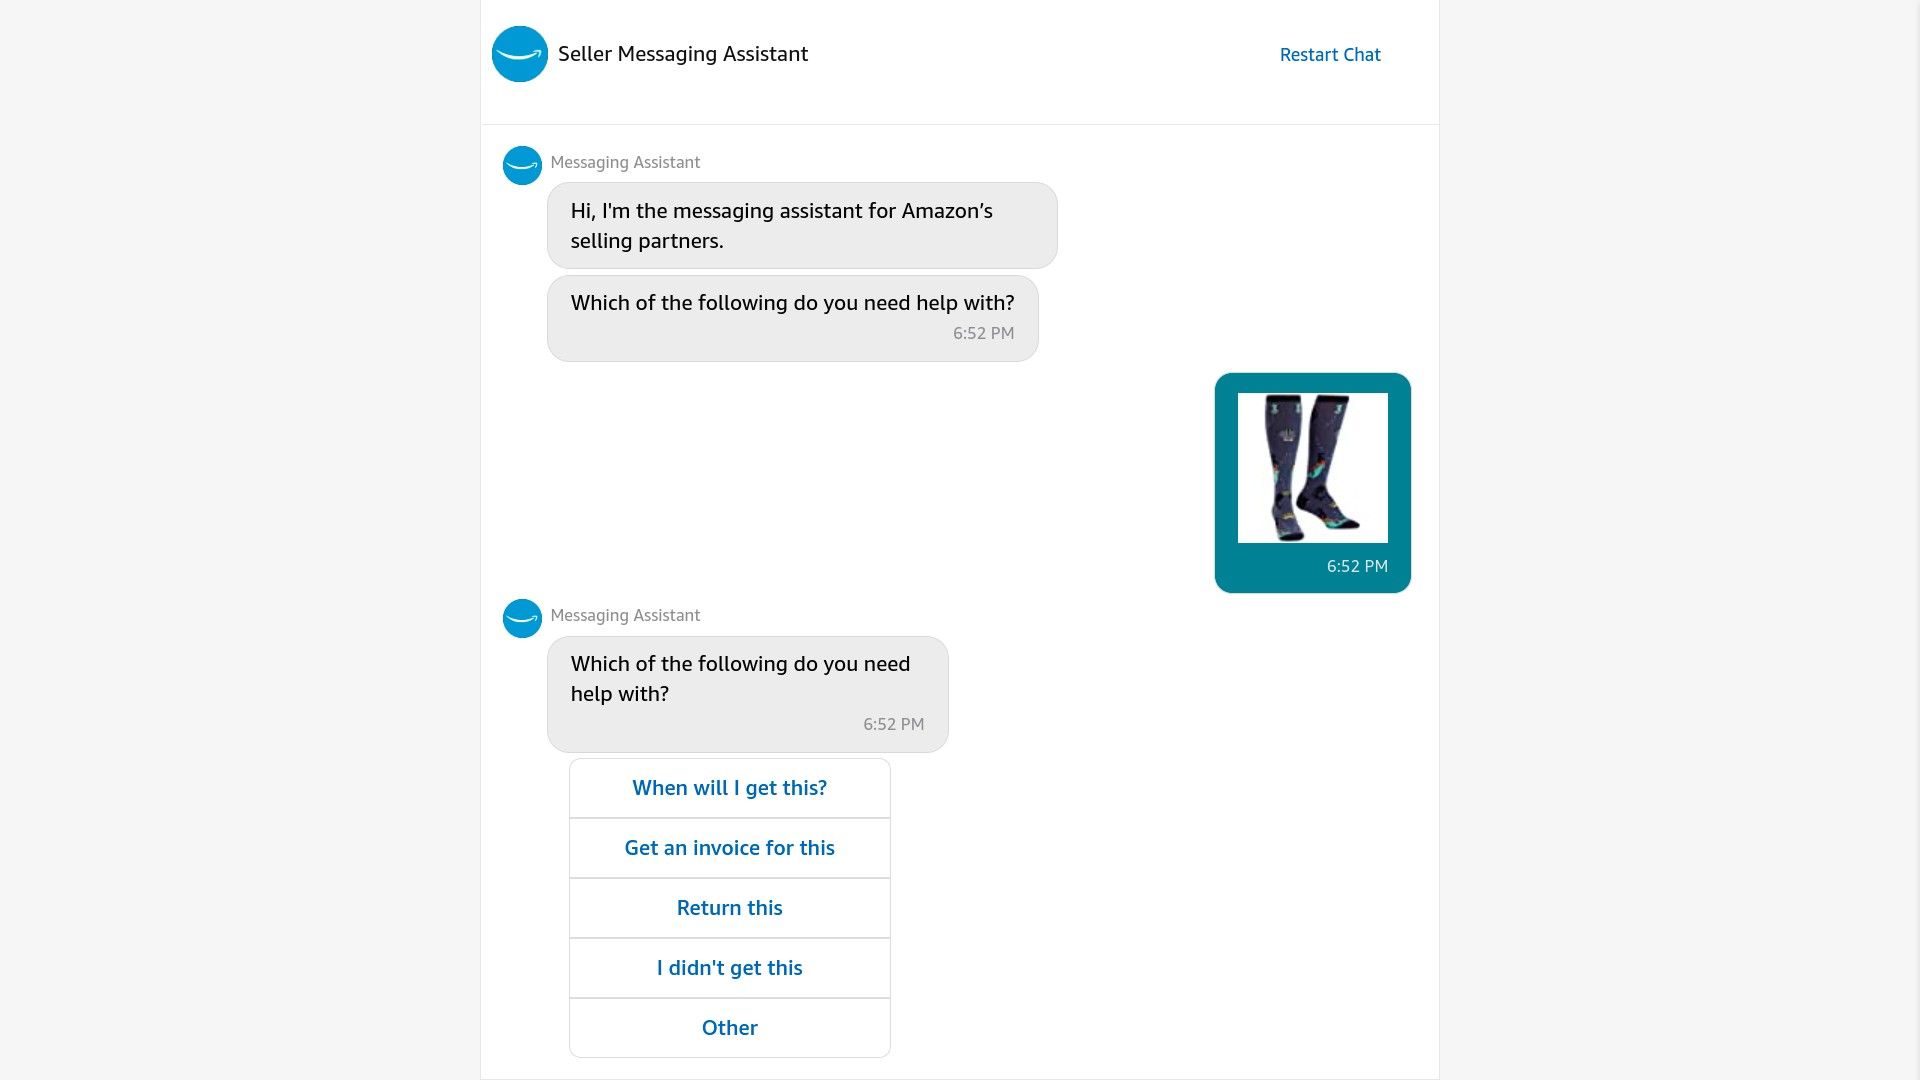 Amazon Seller Messaging Assistant